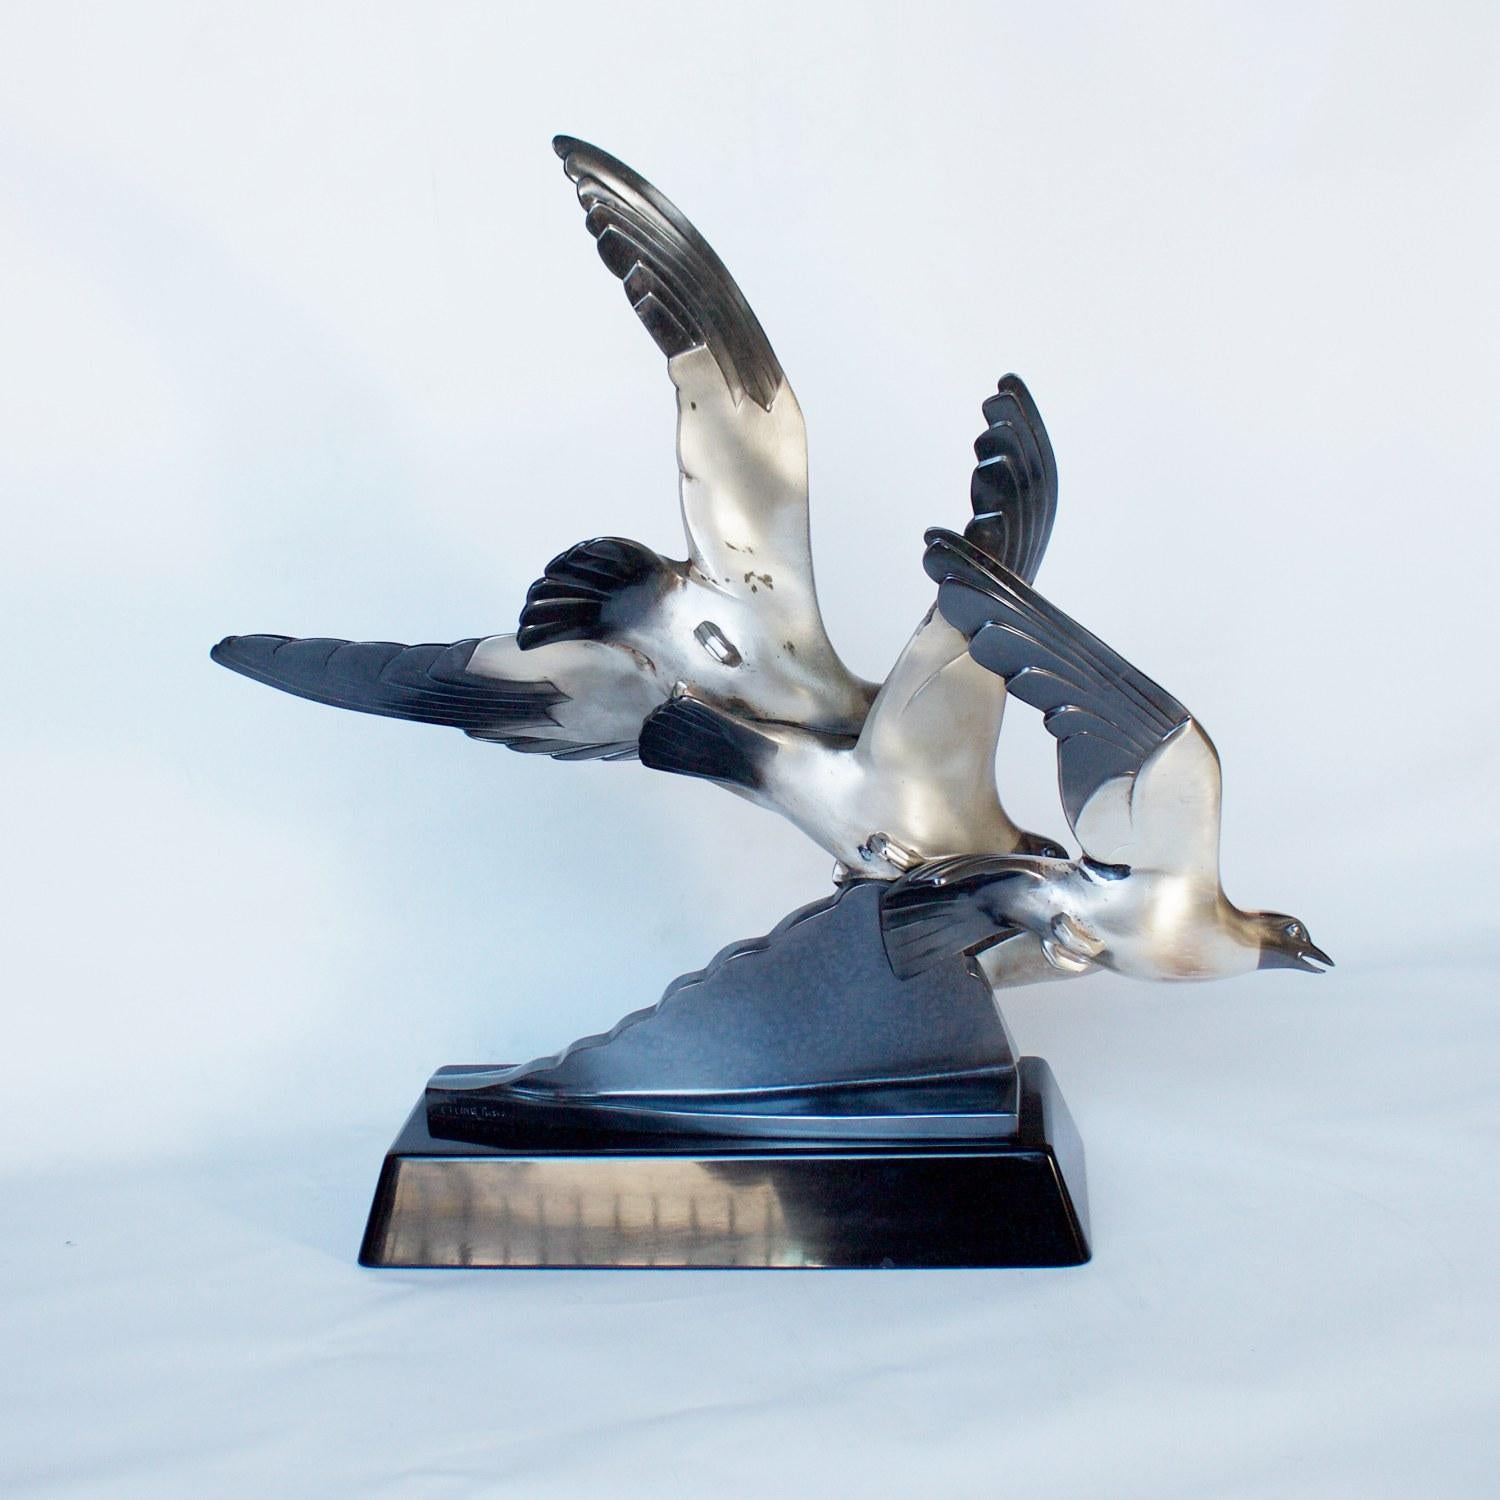 Art Deco Bronze Sculpture Depicting Seagulls in Flight, circa 1925 In Good Condition For Sale In Forest Row, East Sussex